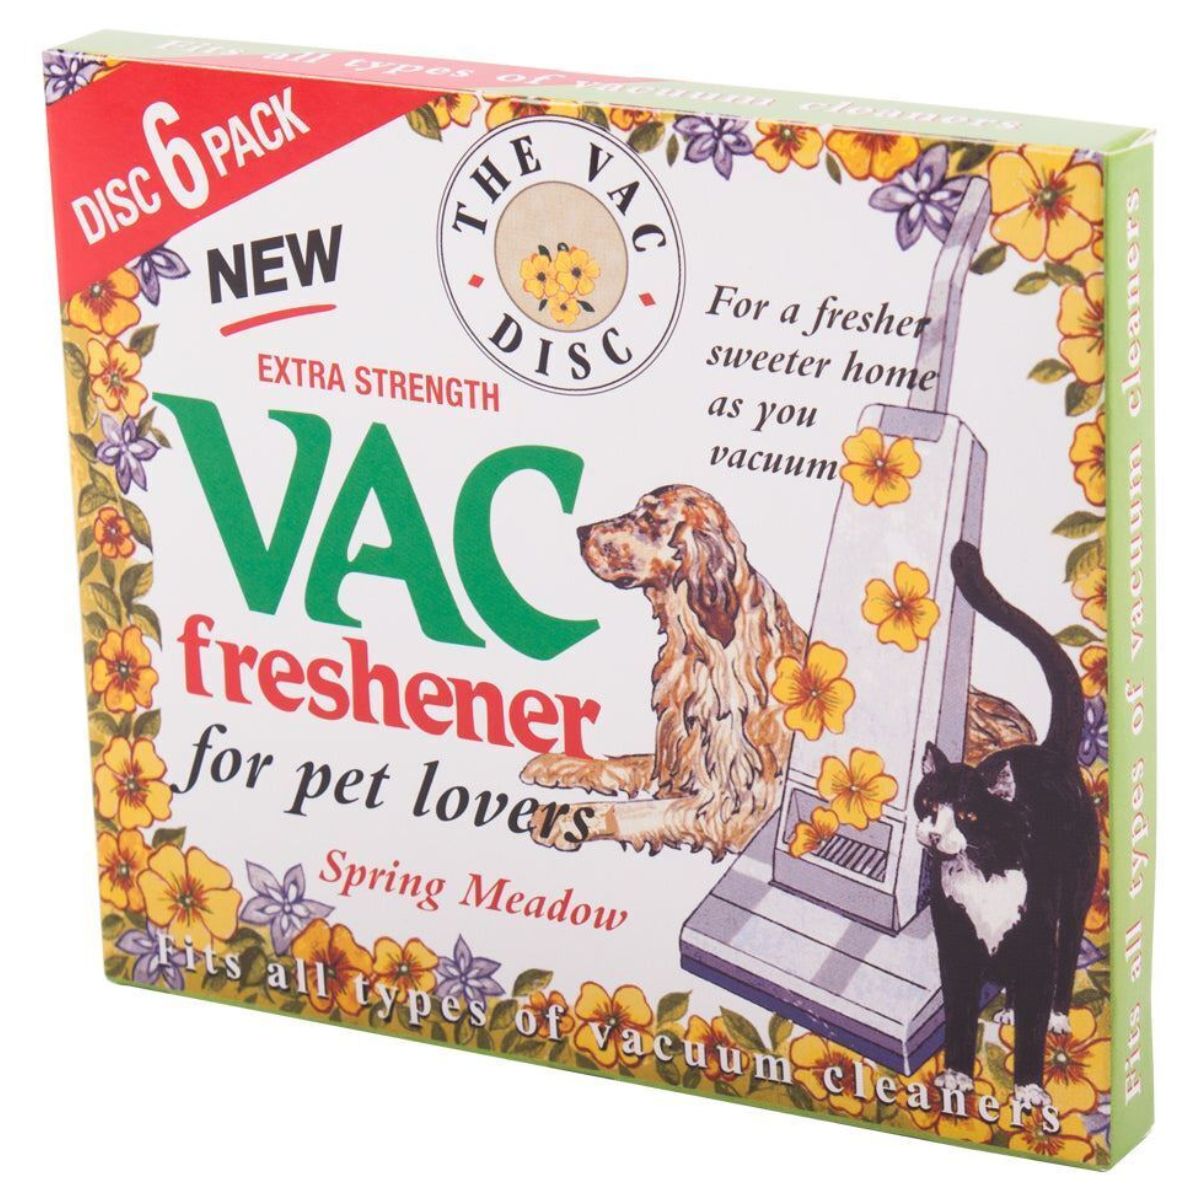 The Vac Disc - Extra Strength Vac Fresheners for Pet Lovers - 6pcs